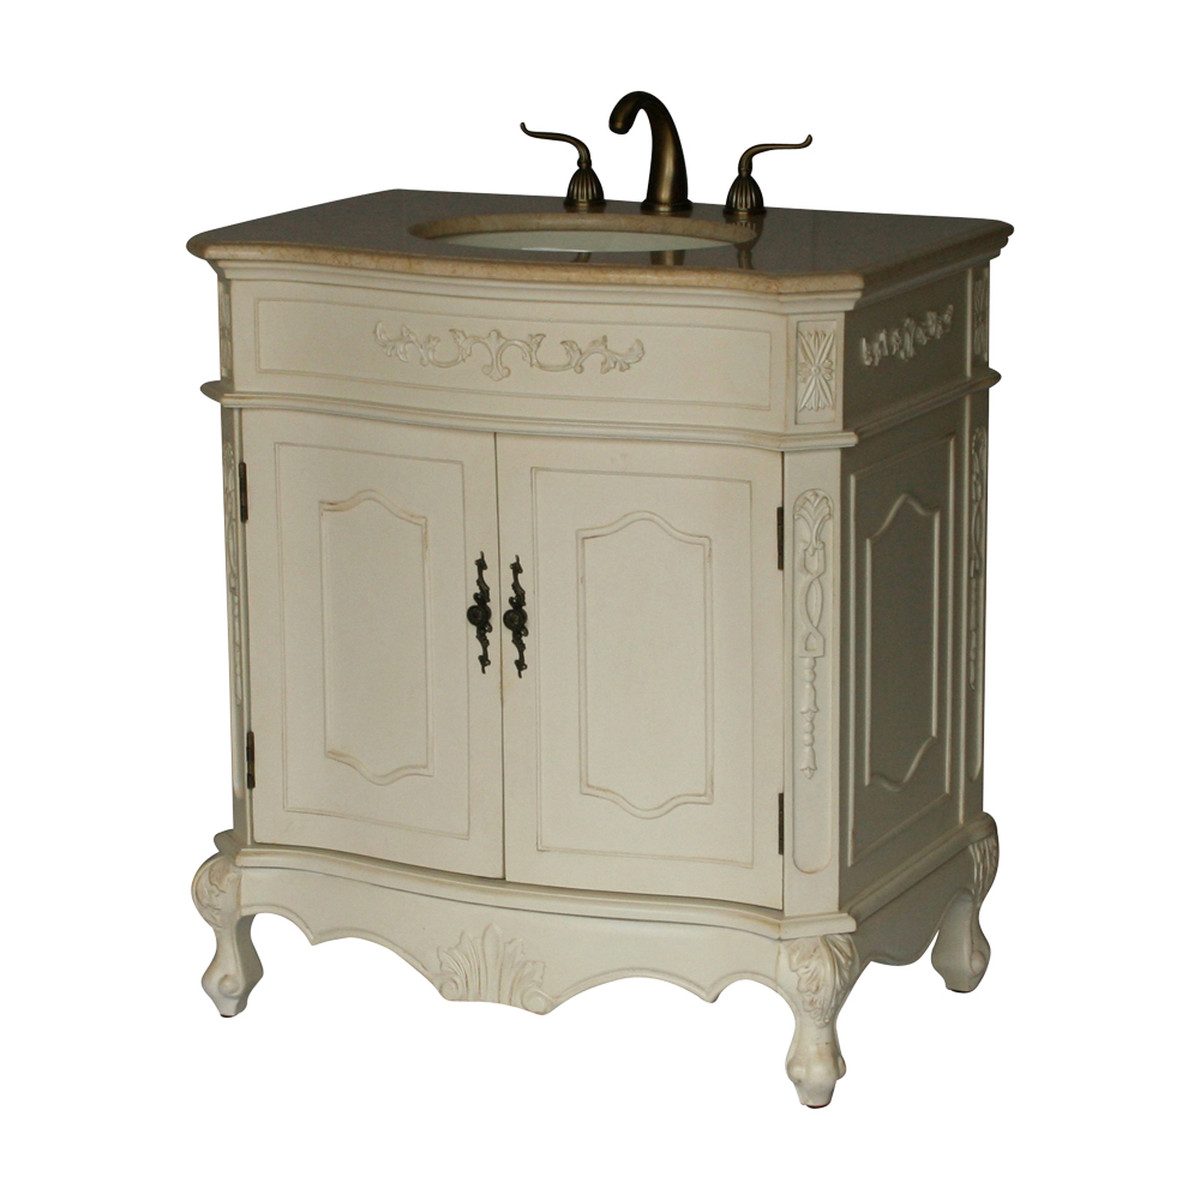 32" Adelina Antique Style Single Sink Bathroom Vanity with Beige Stone Countertop and Antique White Finish